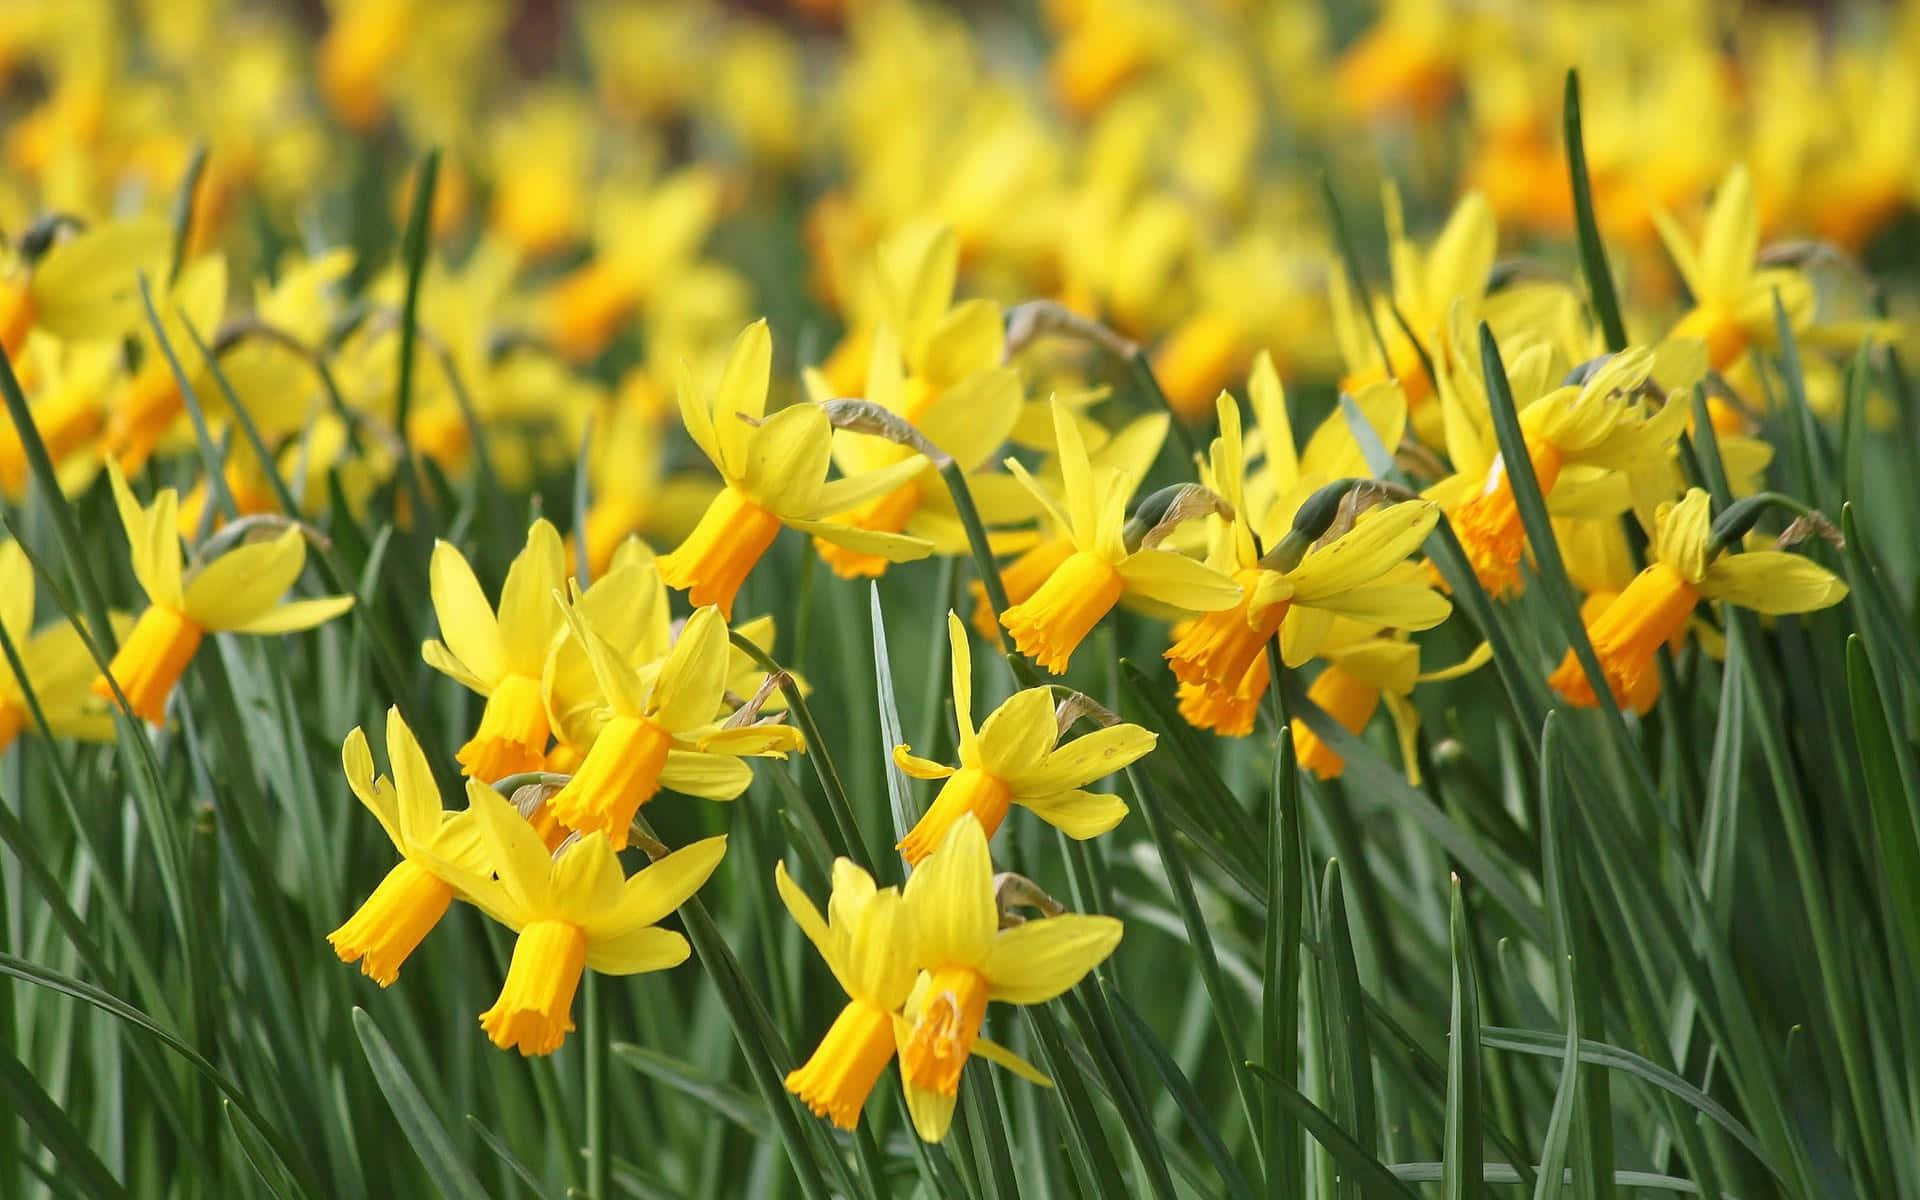 Blooming Yellow Daffodils in Nature Wallpaper